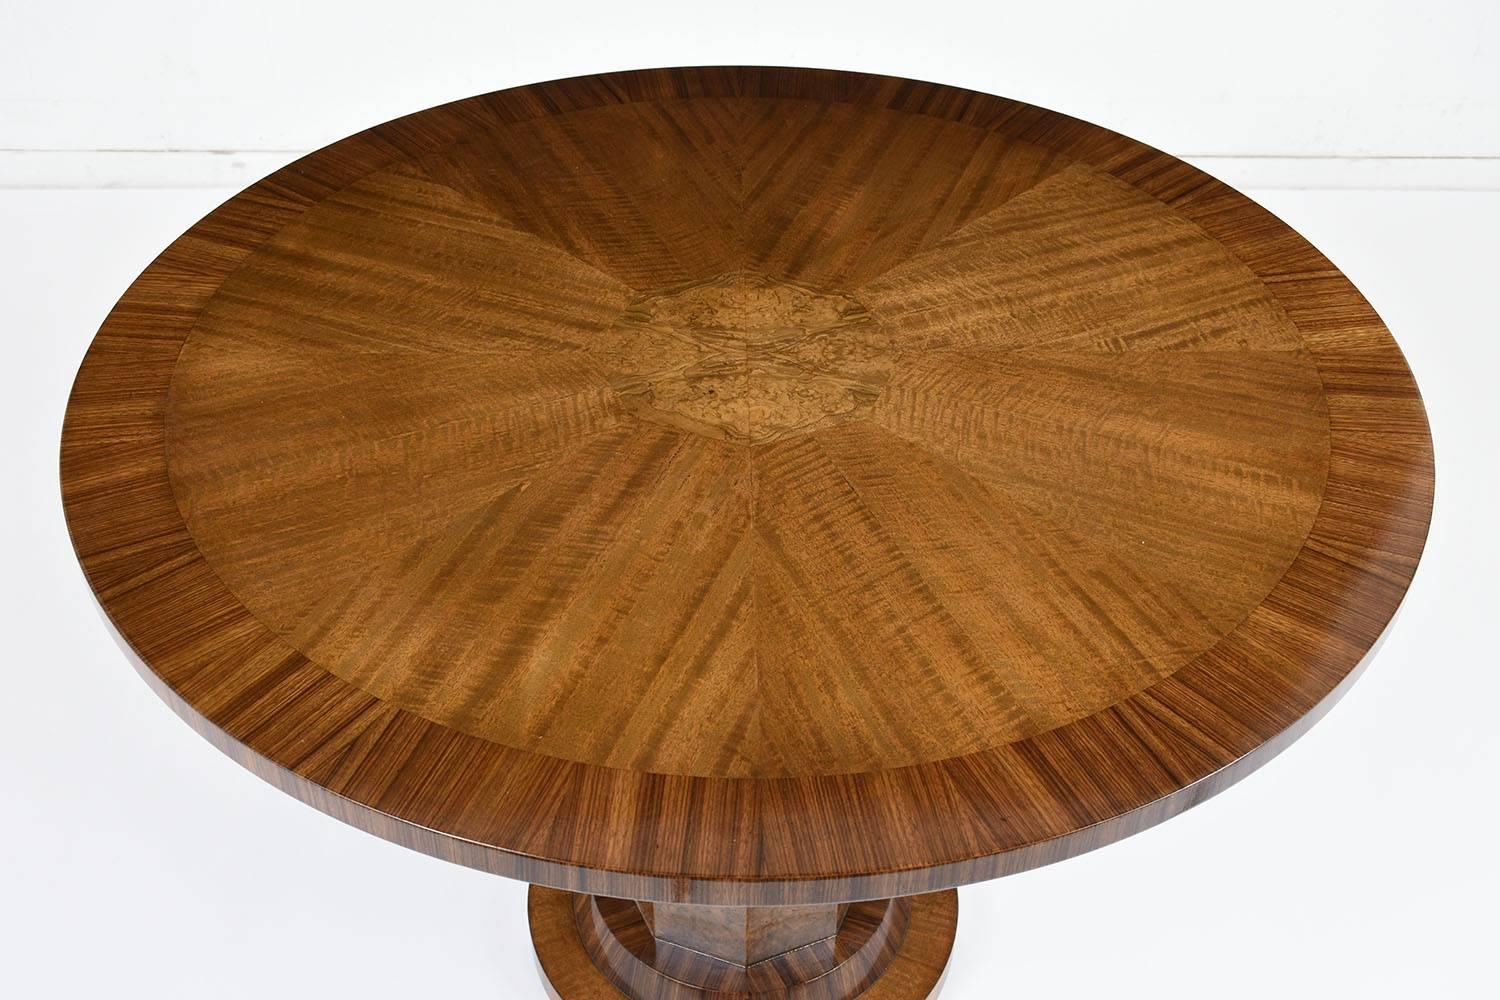 Carved 1960s French Art Deco-Style Round Center Table